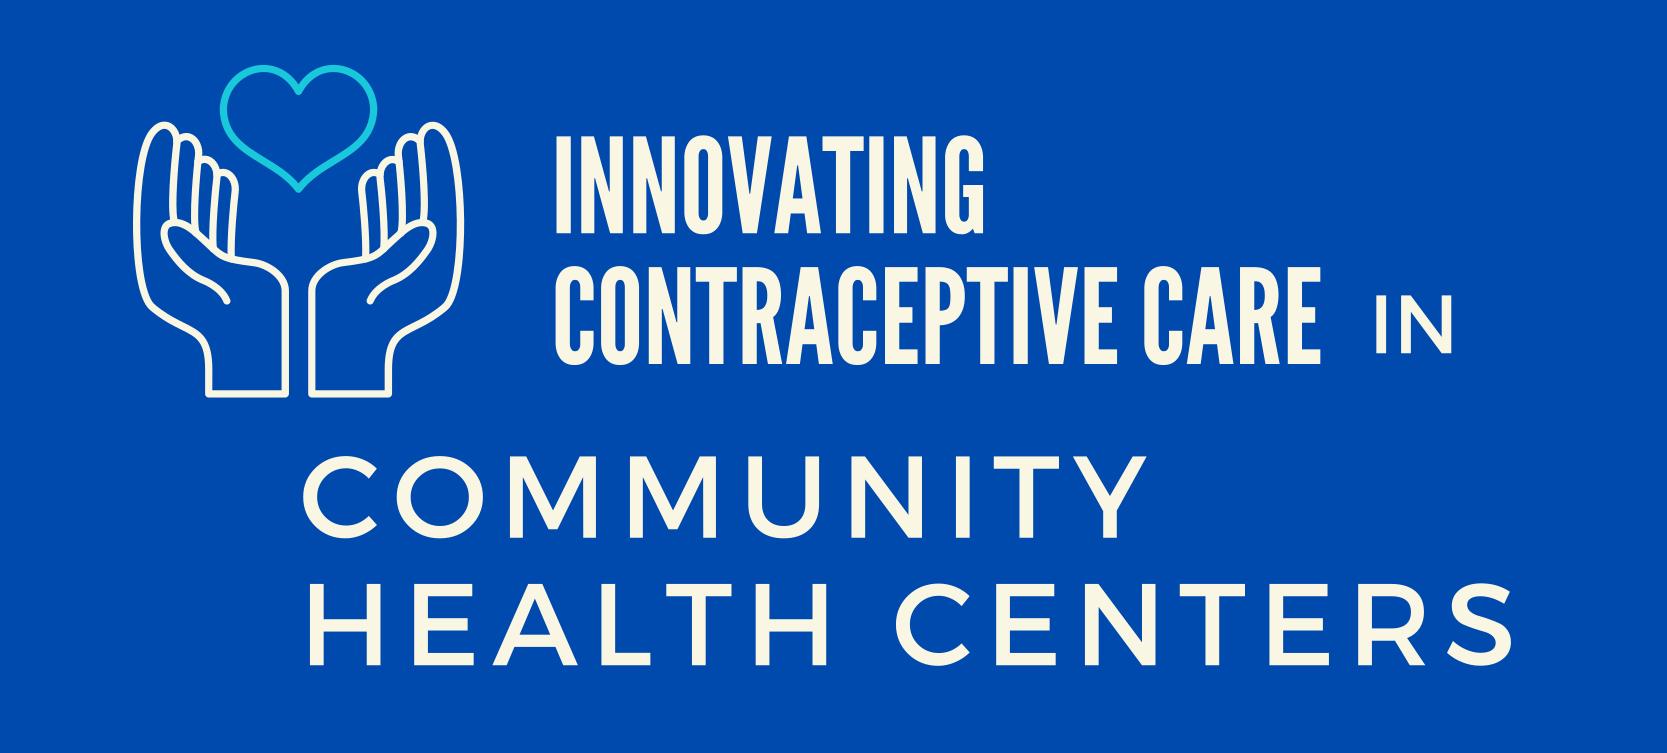 Hands caressing a heart is the logo of Innovating Contraceptive Care in Community Health Centers logo.